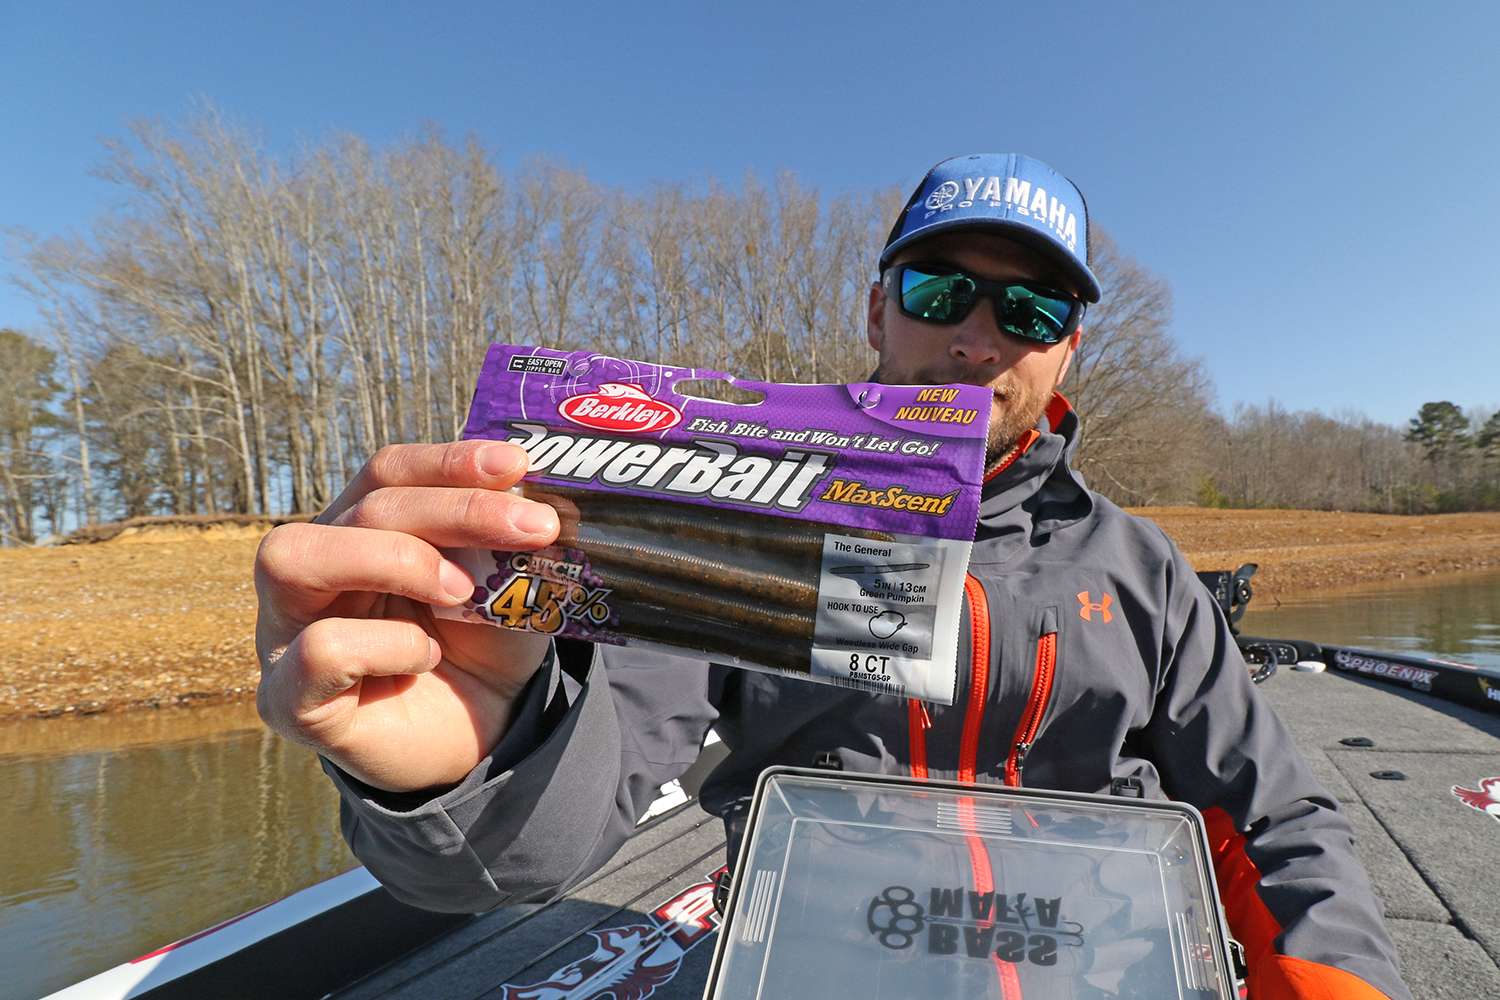 And of course he loves the new Berkley PowerBait MaxScent Generals. 